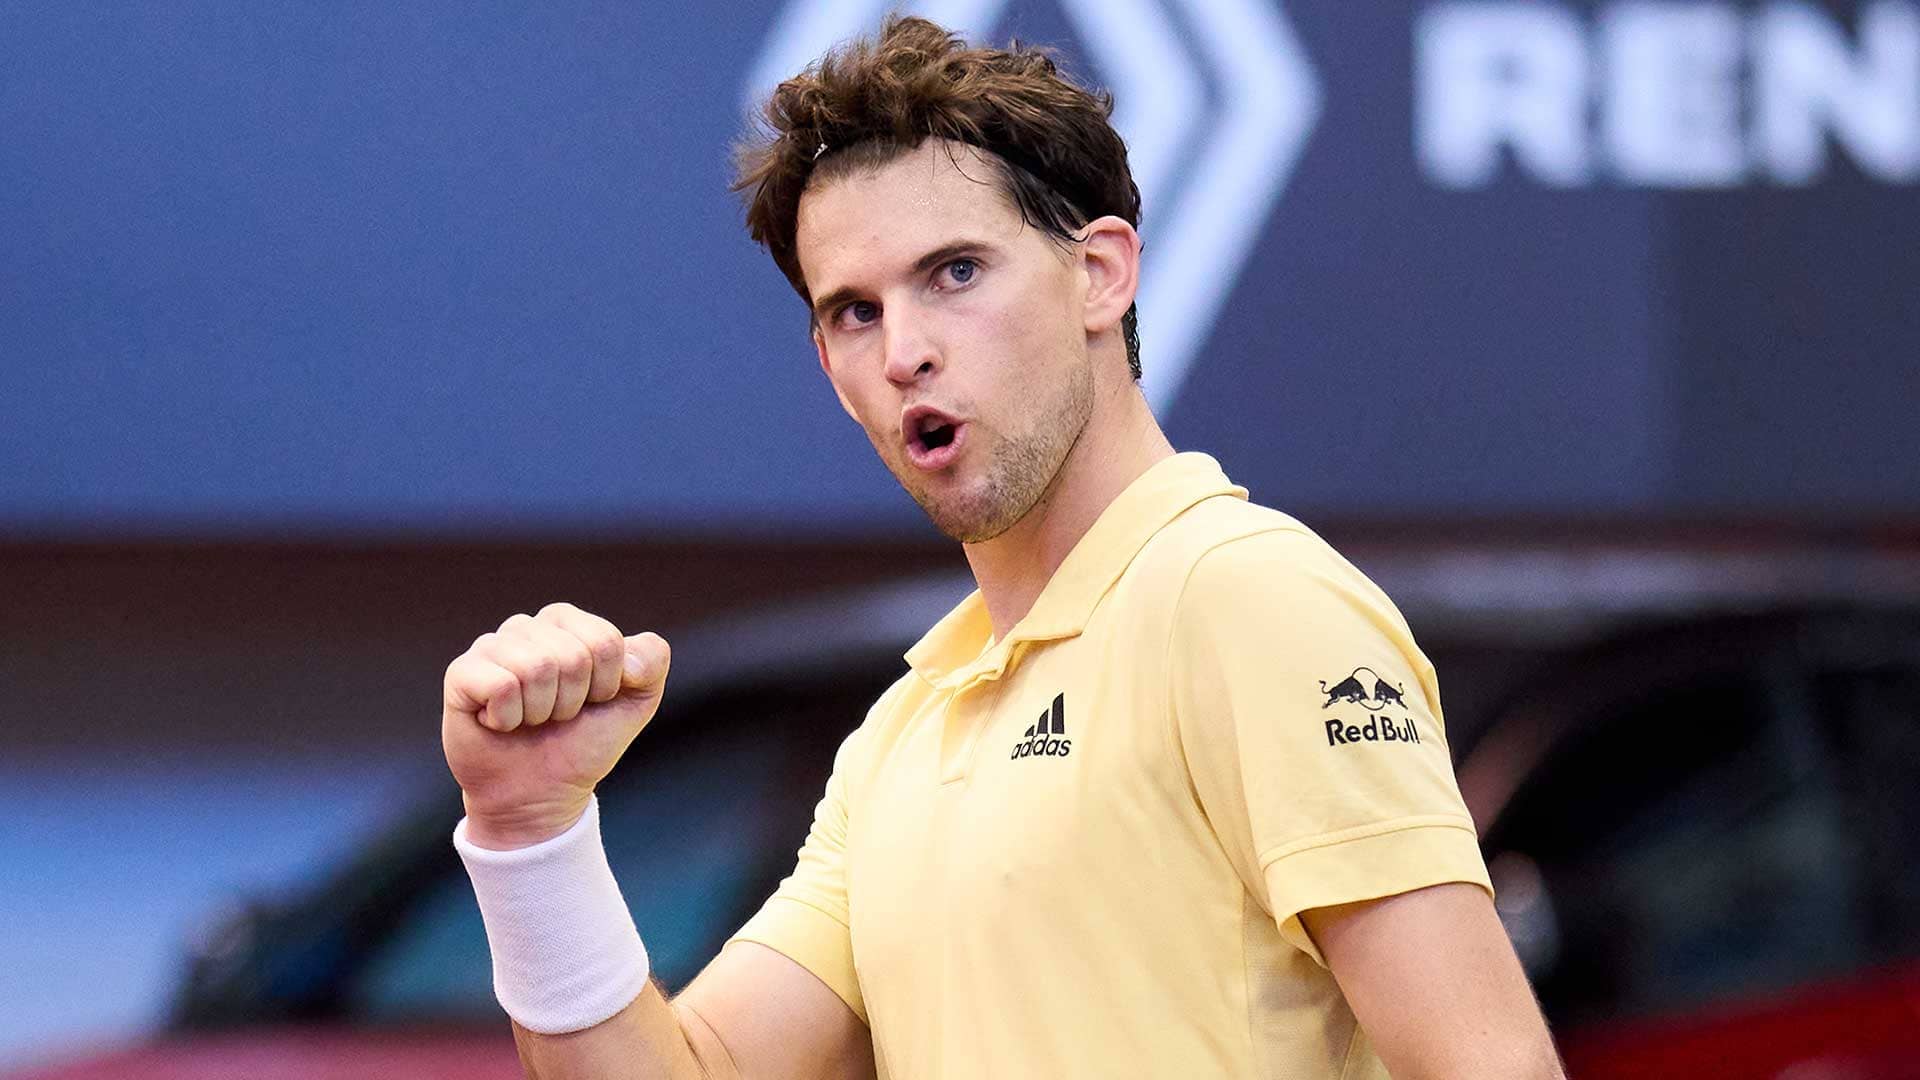 Dominic Thiem is seeking his first tour-level title since 2020, when he won the US Open.